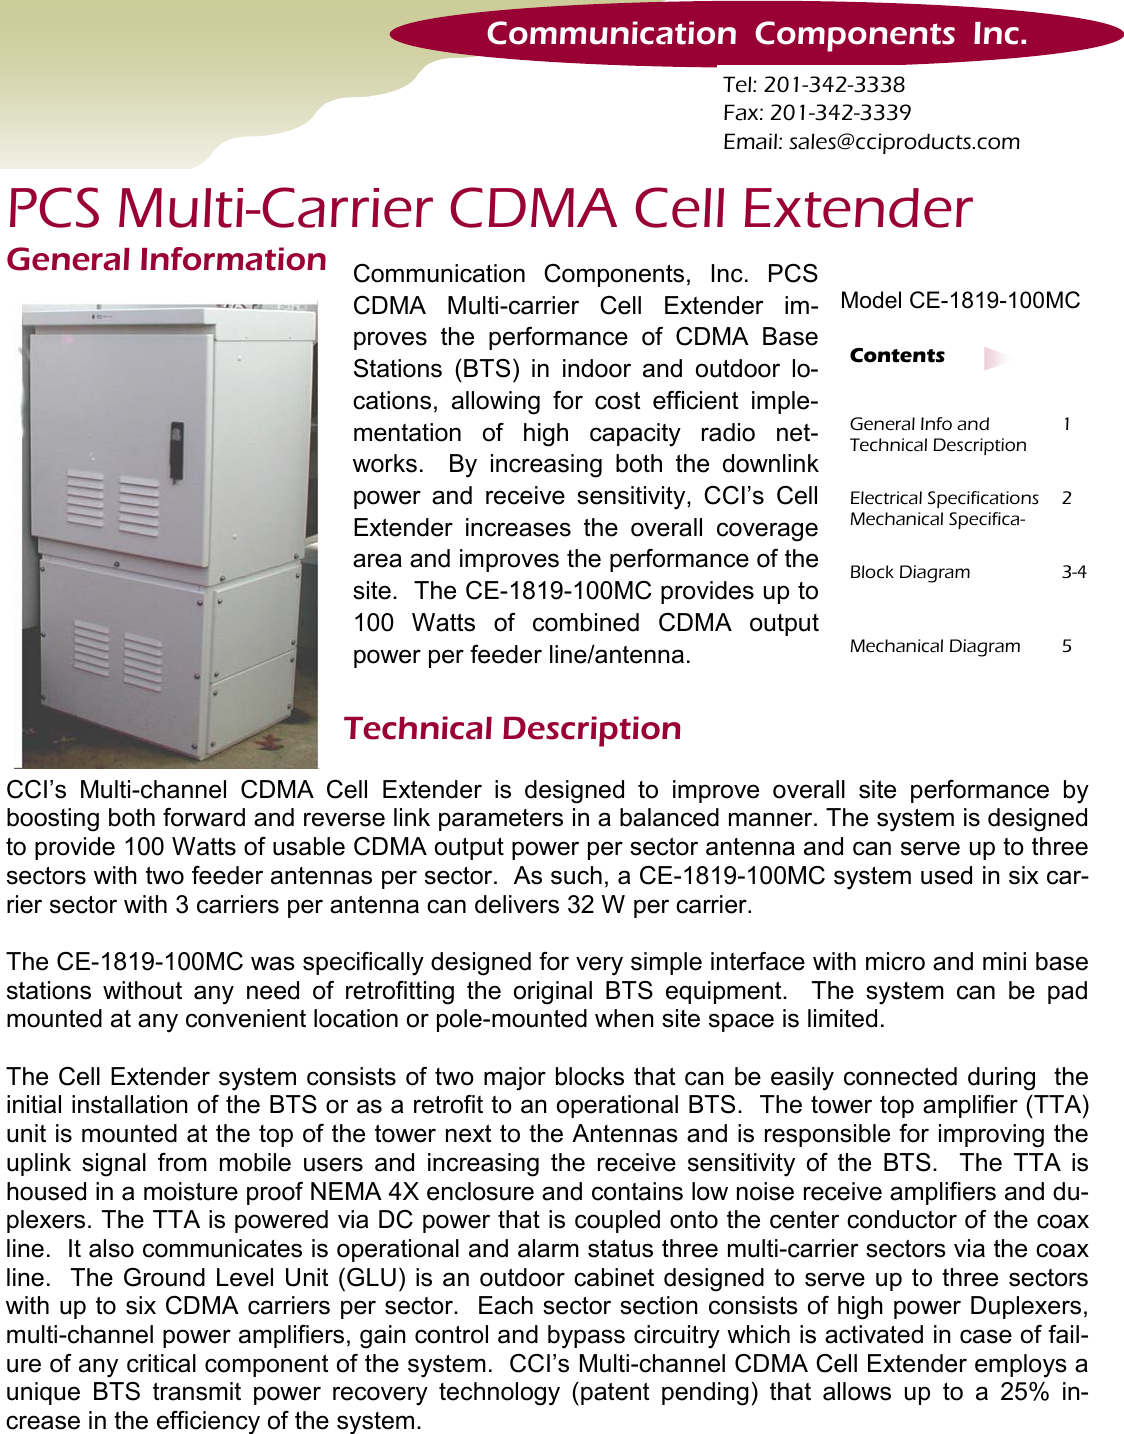 Technical Description General Info and    Technical Description 1 Electrical Specifications Mechanical Specifica-2 Block Diagram  3-4 Mechanical Diagram  5 Contents CCI’s Multi-channel CDMA Cell Extender is designed to improve overall site performance by boosting both forward and reverse link parameters in a balanced manner. The system is designed to provide 100 Watts of usable CDMA output power per sector antenna and can serve up to three sectors with two feeder antennas per sector.  As such, a CE-1819-100MC system used in six car-rier sector with 3 carriers per antenna can delivers 32 W per carrier.    The CE-1819-100MC was specifically designed for very simple interface with micro and mini base stations without any need of retrofitting the original BTS equipment.  The system can be pad mounted at any convenient location or pole-mounted when site space is limited.    The Cell Extender system consists of two major blocks that can be easily connected during  the initial installation of the BTS or as a retrofit to an operational BTS.  The tower top amplifier (TTA) unit is mounted at the top of the tower next to the Antennas and is responsible for improving the uplink signal from mobile users and increasing the receive sensitivity of the BTS.  The TTA is housed in a moisture proof NEMA 4X enclosure and contains low noise receive amplifiers and du-plexers. The TTA is powered via DC power that is coupled onto the center conductor of the coax line.  It also communicates is operational and alarm status three multi-carrier sectors via the coax line.  The Ground Level Unit (GLU) is an outdoor cabinet designed to serve up to three sectors with up to six CDMA carriers per sector.  Each sector section consists of high power Duplexers, multi-channel power amplifiers, gain control and bypass circuitry which is activated in case of fail-ure of any critical component of the system.  CCI’s Multi-channel CDMA Cell Extender employs a unique BTS transmit power recovery technology (patent pending) that allows up to a 25% in-crease in the efficiency of the system.   Communication  Components  Inc. Tel: 201-342-3338 Fax: 201-342-3339 Email: sales@cciproducts.com PCS Multi-Carrier CDMA Cell Extender Model CE-1819-100MC General Information  Communication Components, Inc. PCS CDMA Multi-carrier Cell Extender im-proves the performance of CDMA Base Stations (BTS) in indoor and outdoor lo-cations, allowing for cost efficient imple-mentation of high capacity radio net-works.  By increasing both the downlink power and receive sensitivity, CCI’s Cell Extender increases the overall coverage area and improves the performance of the site.  The CE-1819-100MC provides up to 100 Watts of combined CDMA output power per feeder line/antenna. 